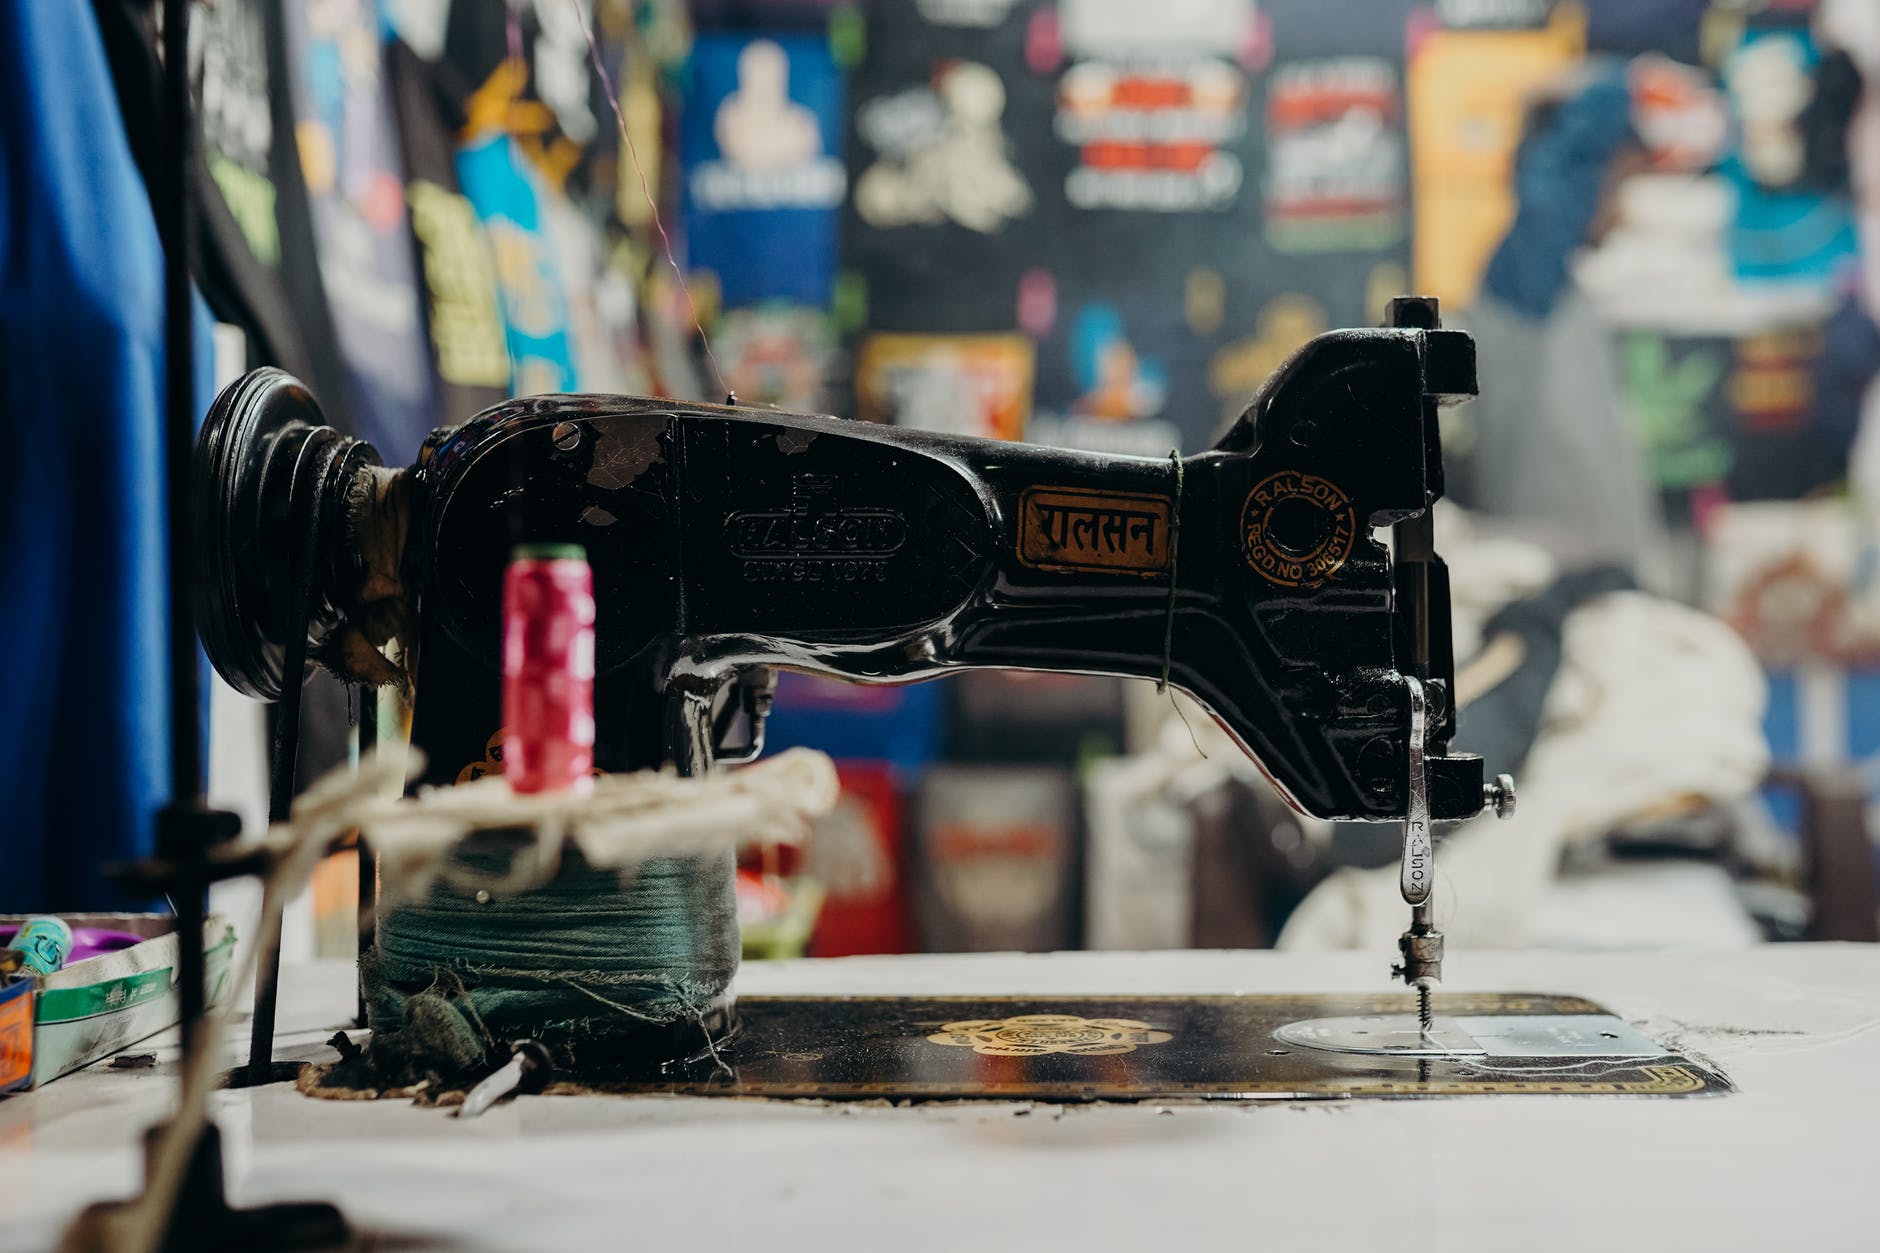 Antique Sewing Machine - National Sewing Machine Day - a day to honor that machine that is used to attach things to together like fabric. #SewingMachineDay (Pexel Photo by CottonBro) 